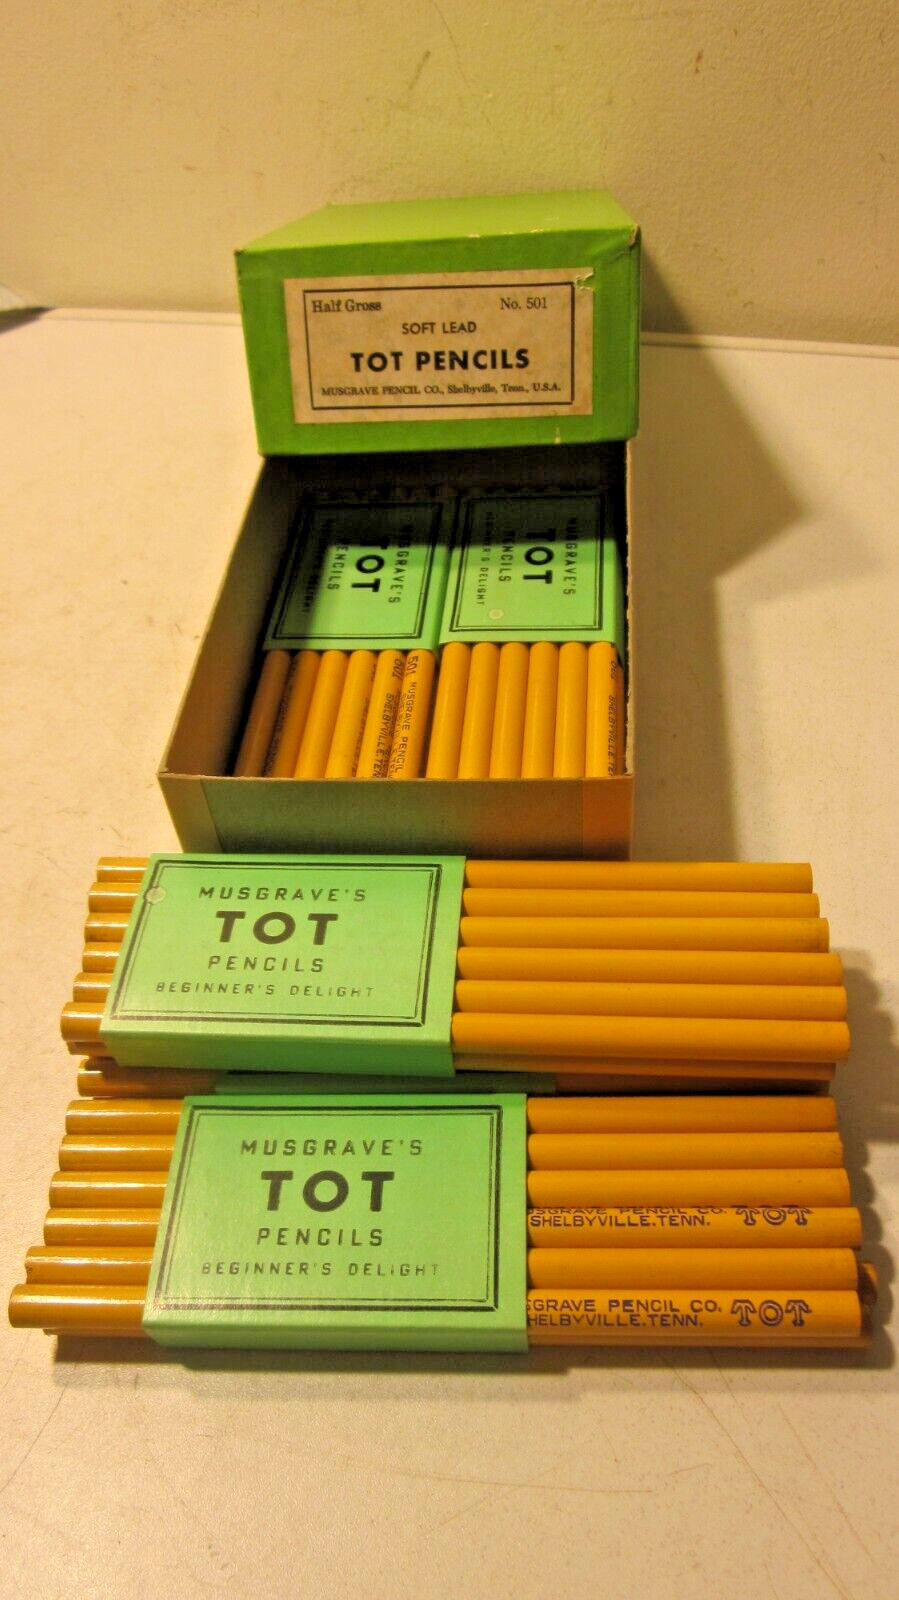 Vintage Half Gross No.501 Soft Lead TOT PENCILS 5 Stack in Box